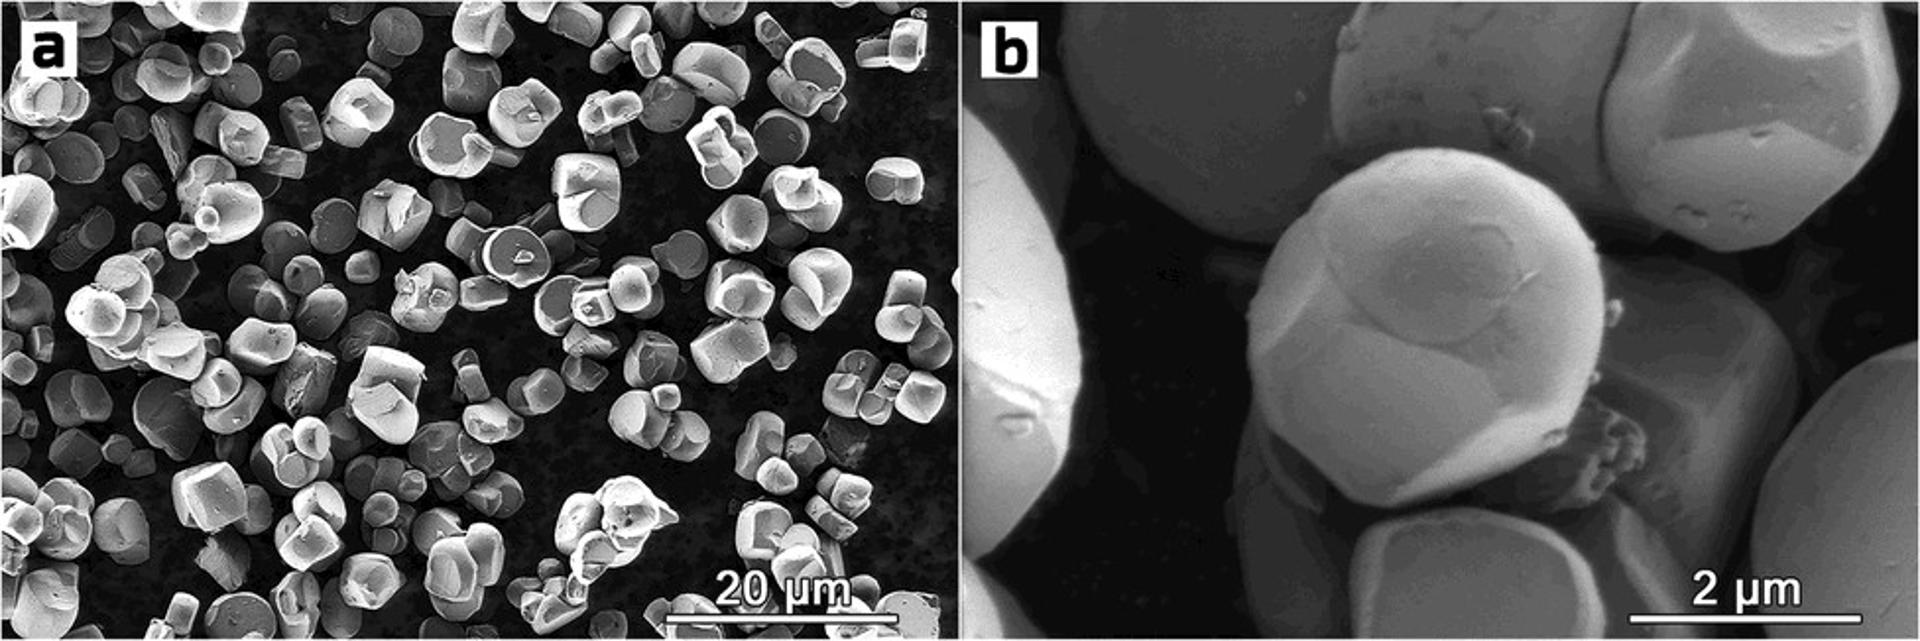 Microscopic images of the spherical particles making up a promising new battery electrode Ivan Moiseev et al./Energy Advances